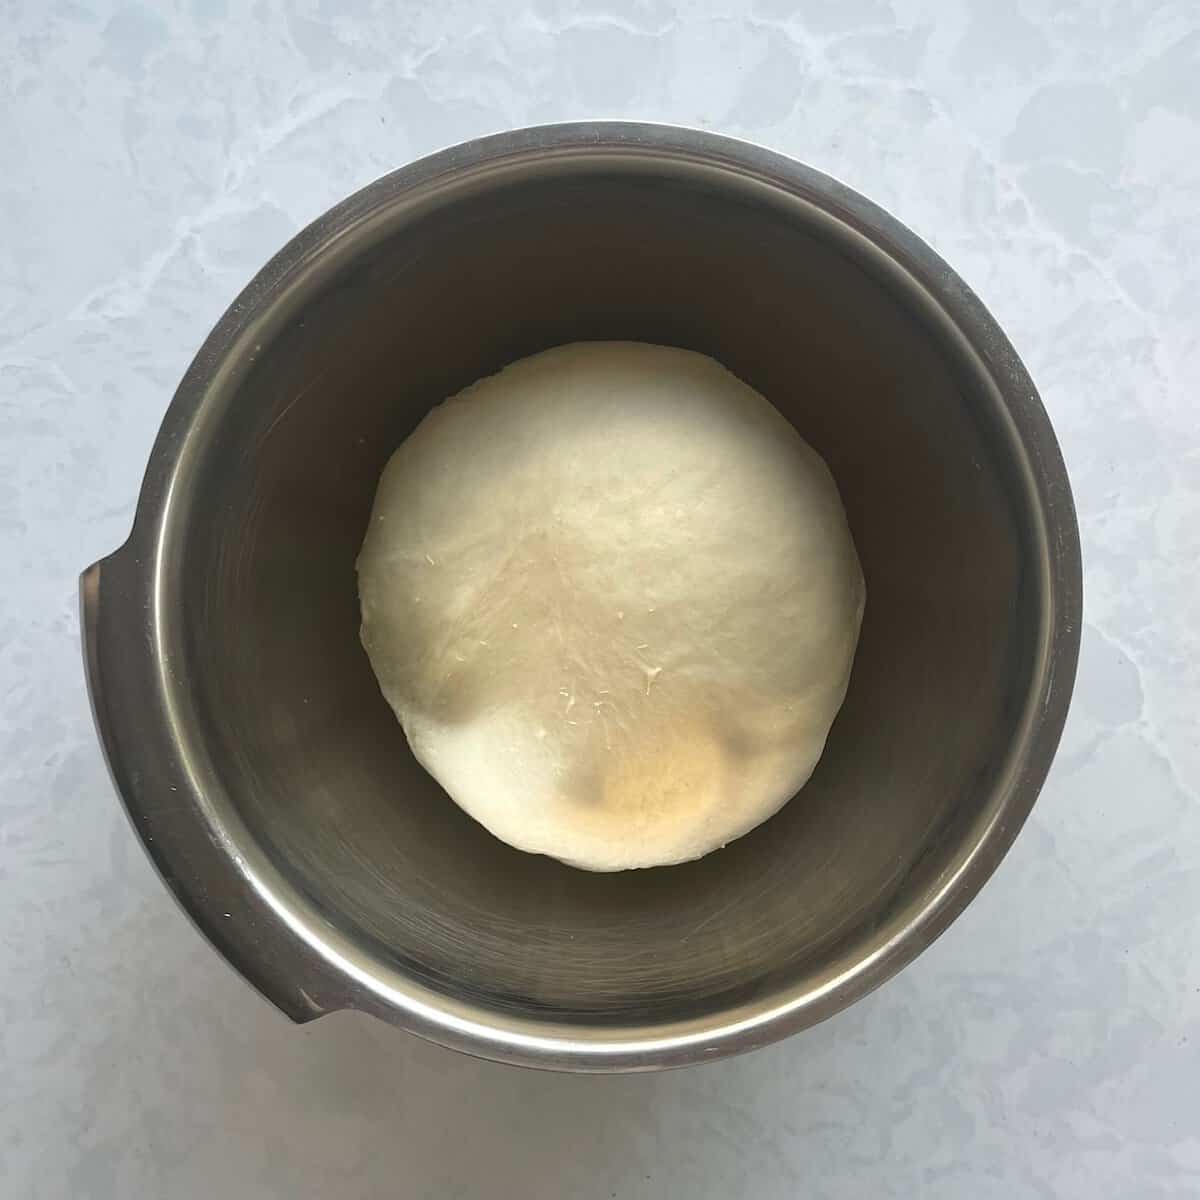 dough ball in a greased metal bowl.